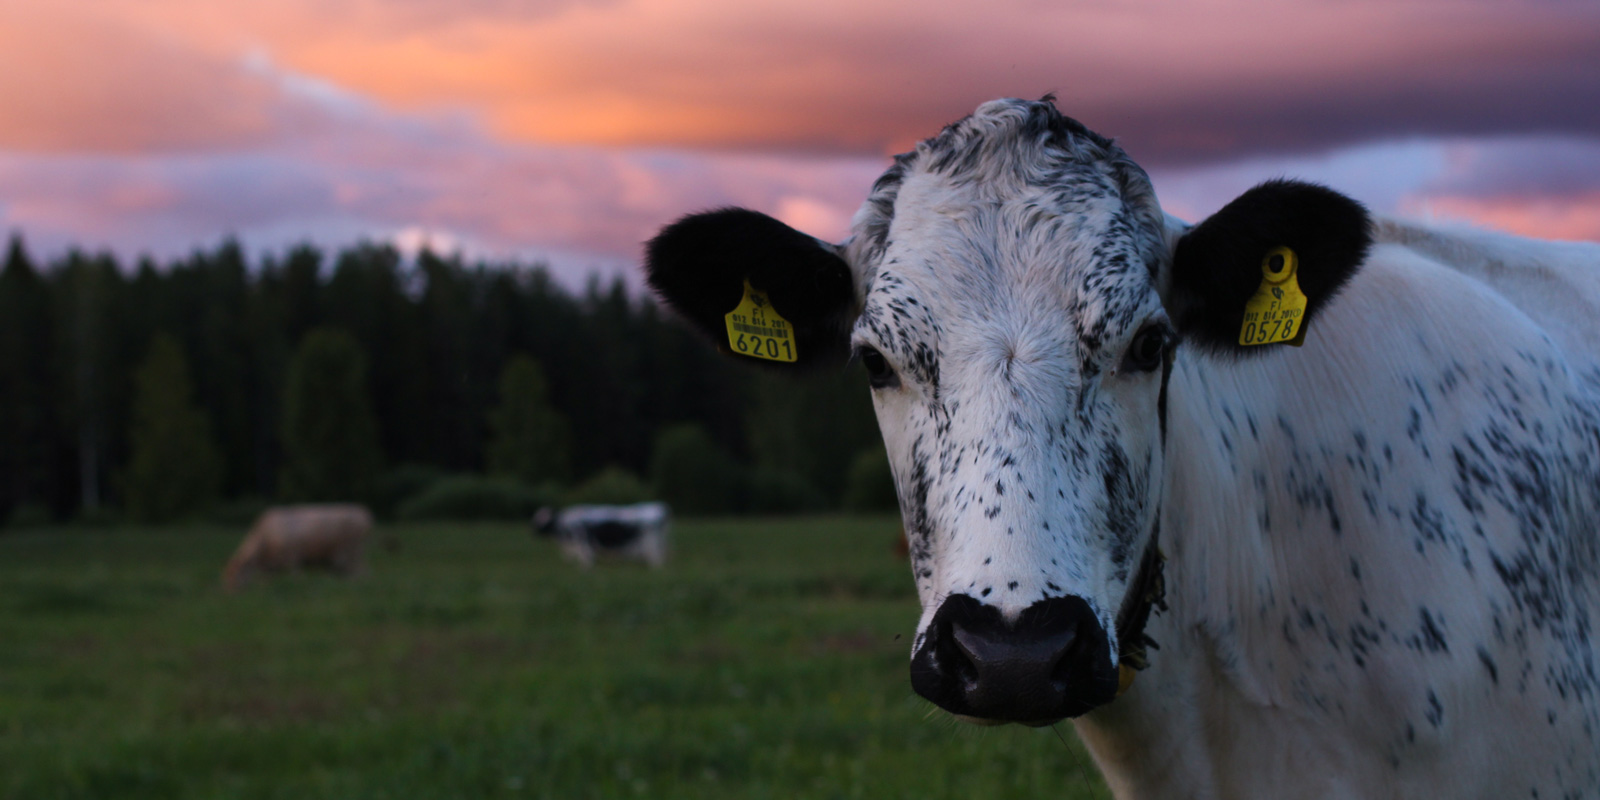 Black and white cow looking into the camera on field at sunset